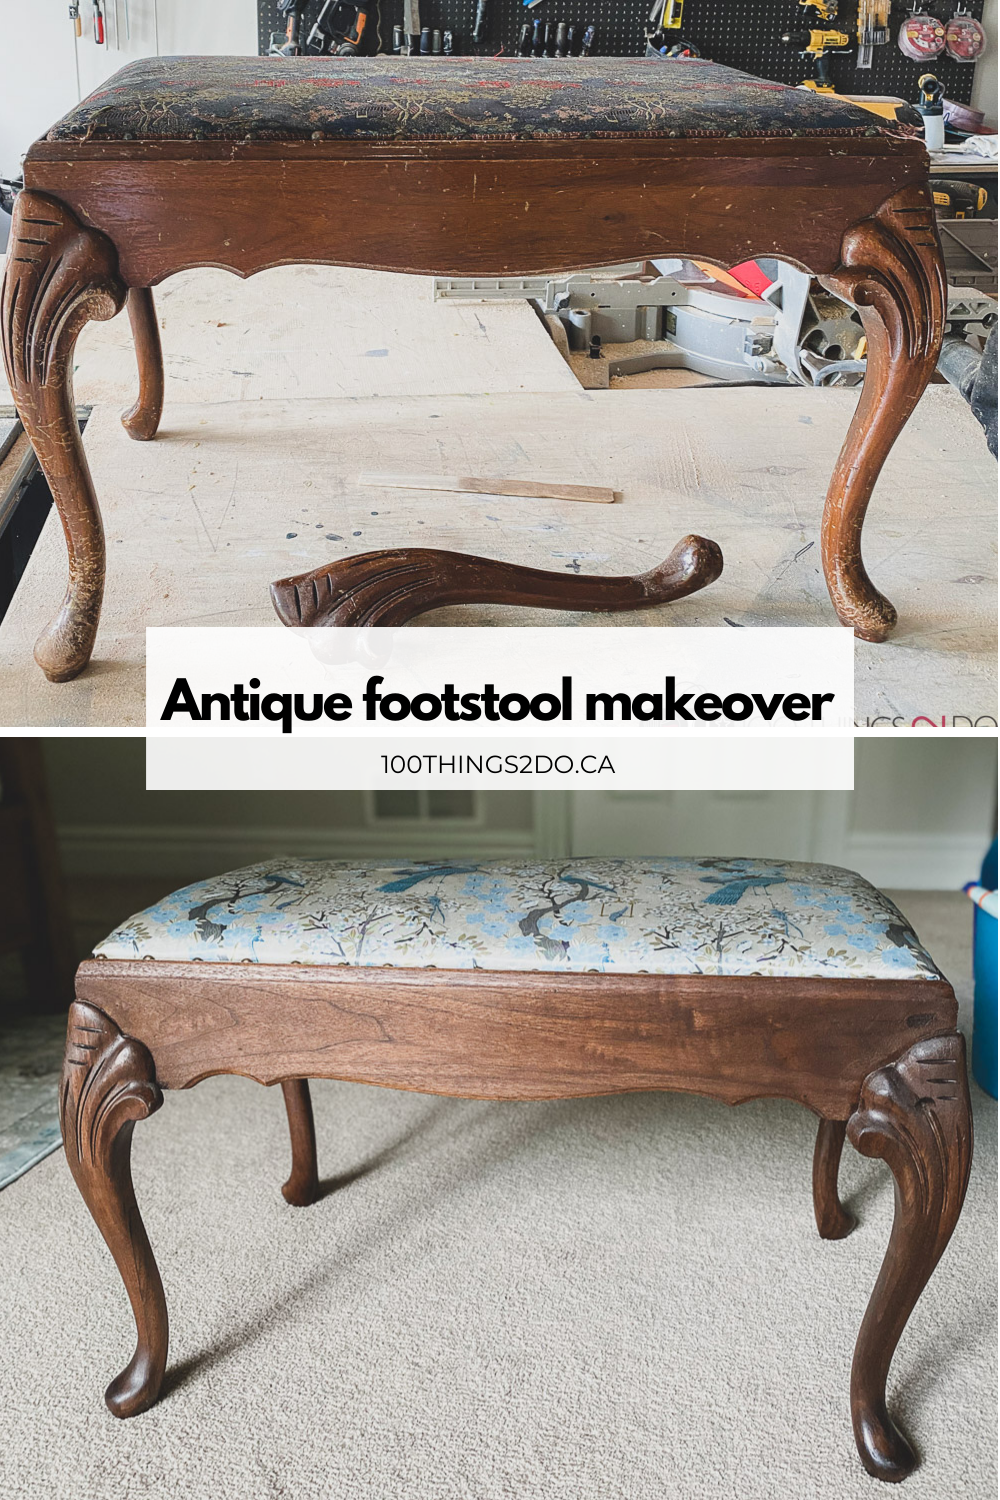 antique footstool, antique footstool makeover